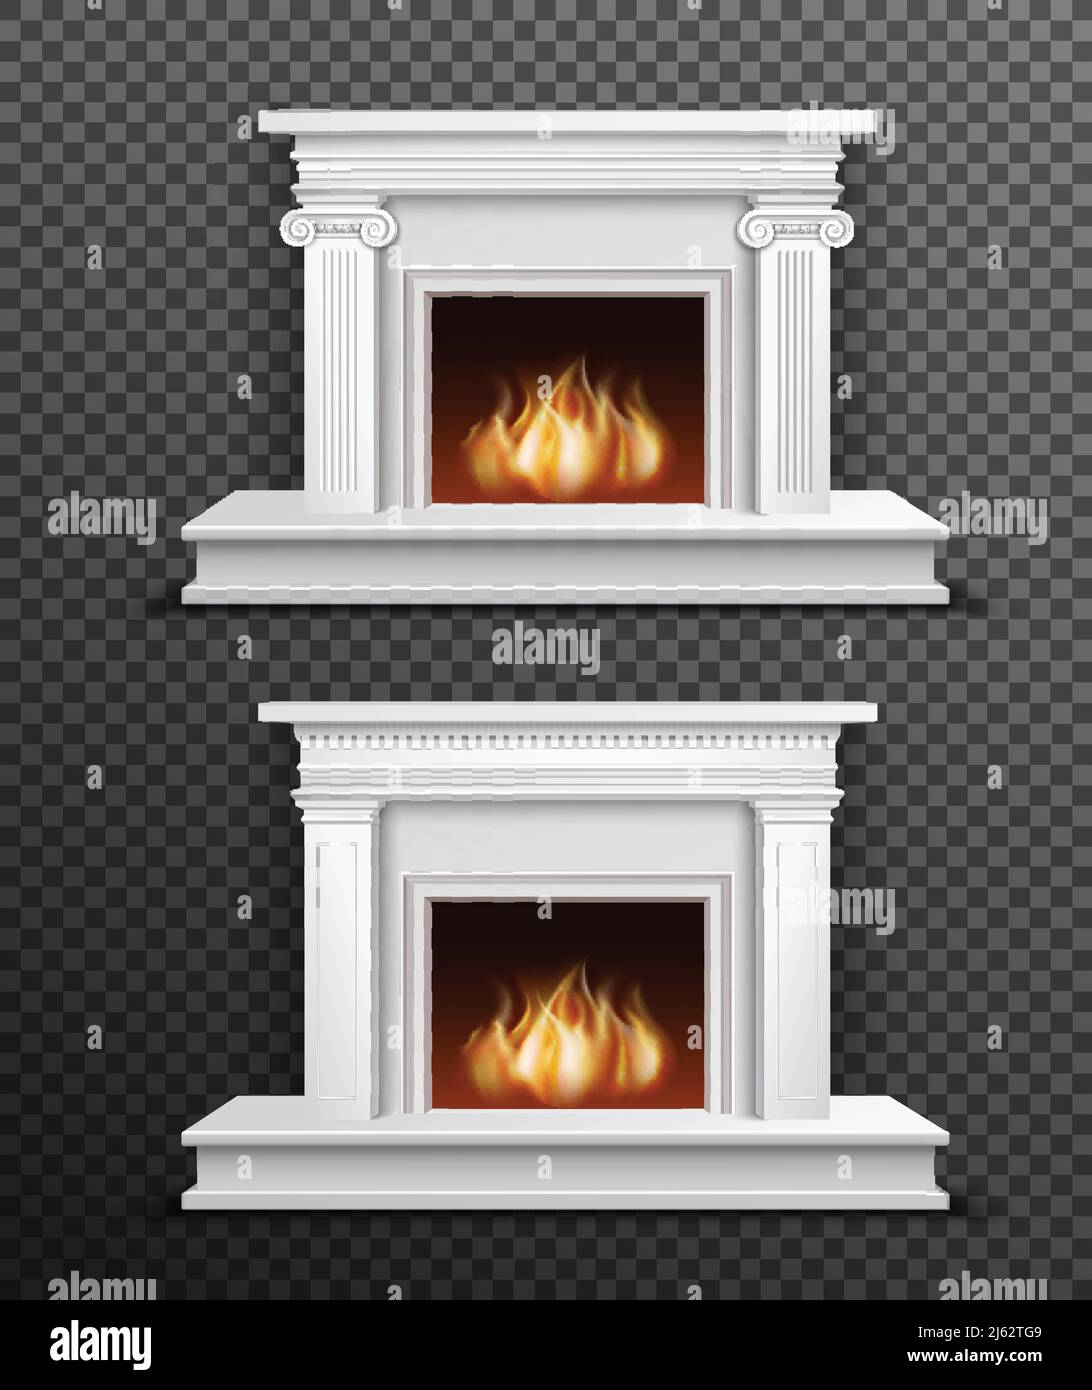 Set of 2 modern white indoor burning fireplaces one under another on black transparent background vector illustration Stock Vector